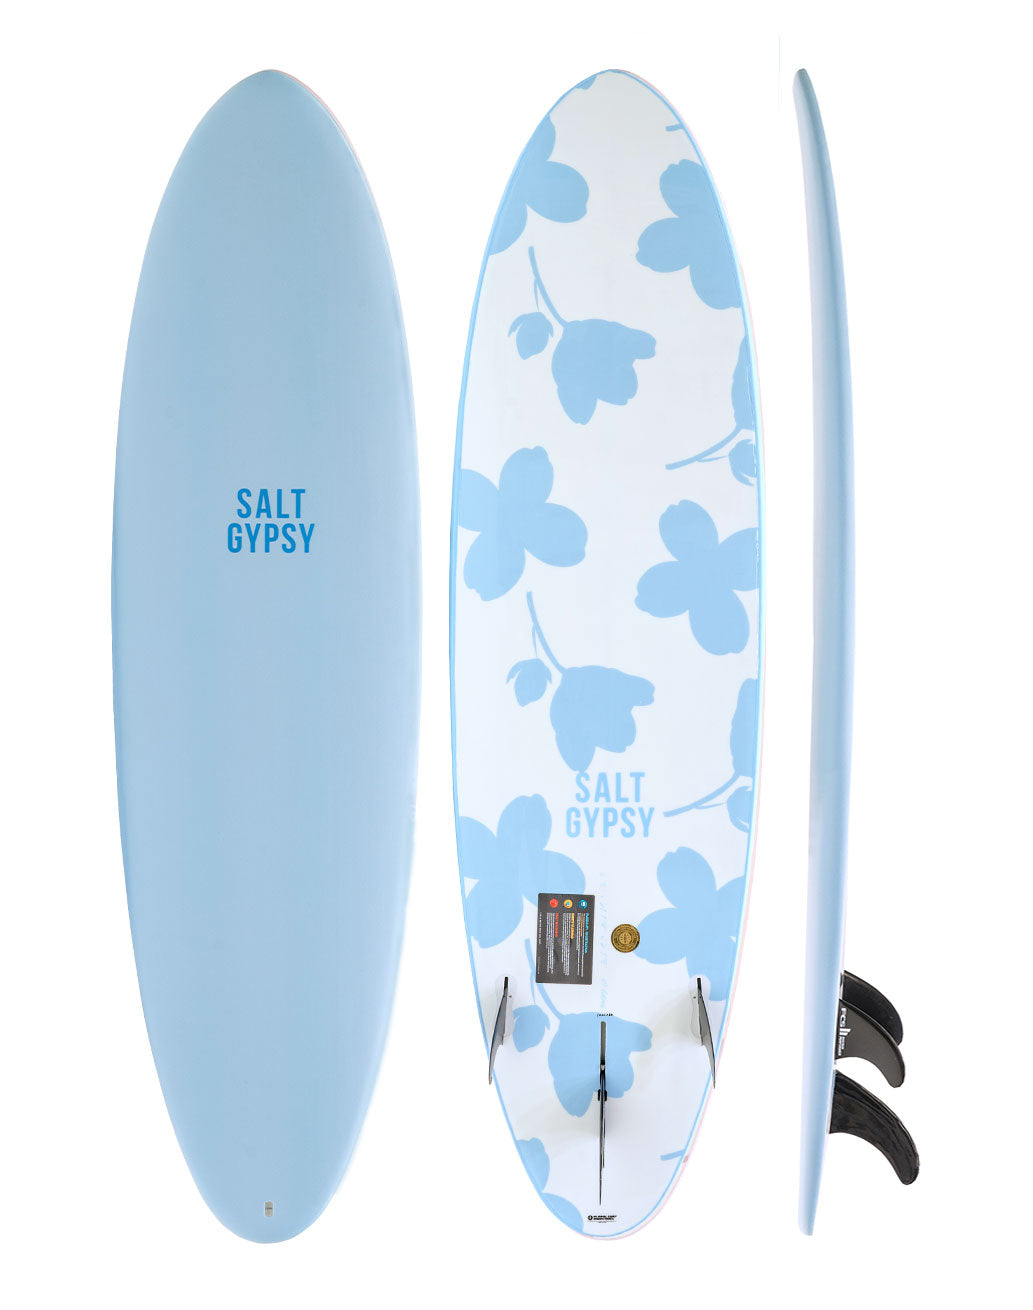 Salt Gypsy Surfboards - Mid Tide blue and white floral soft surfboard